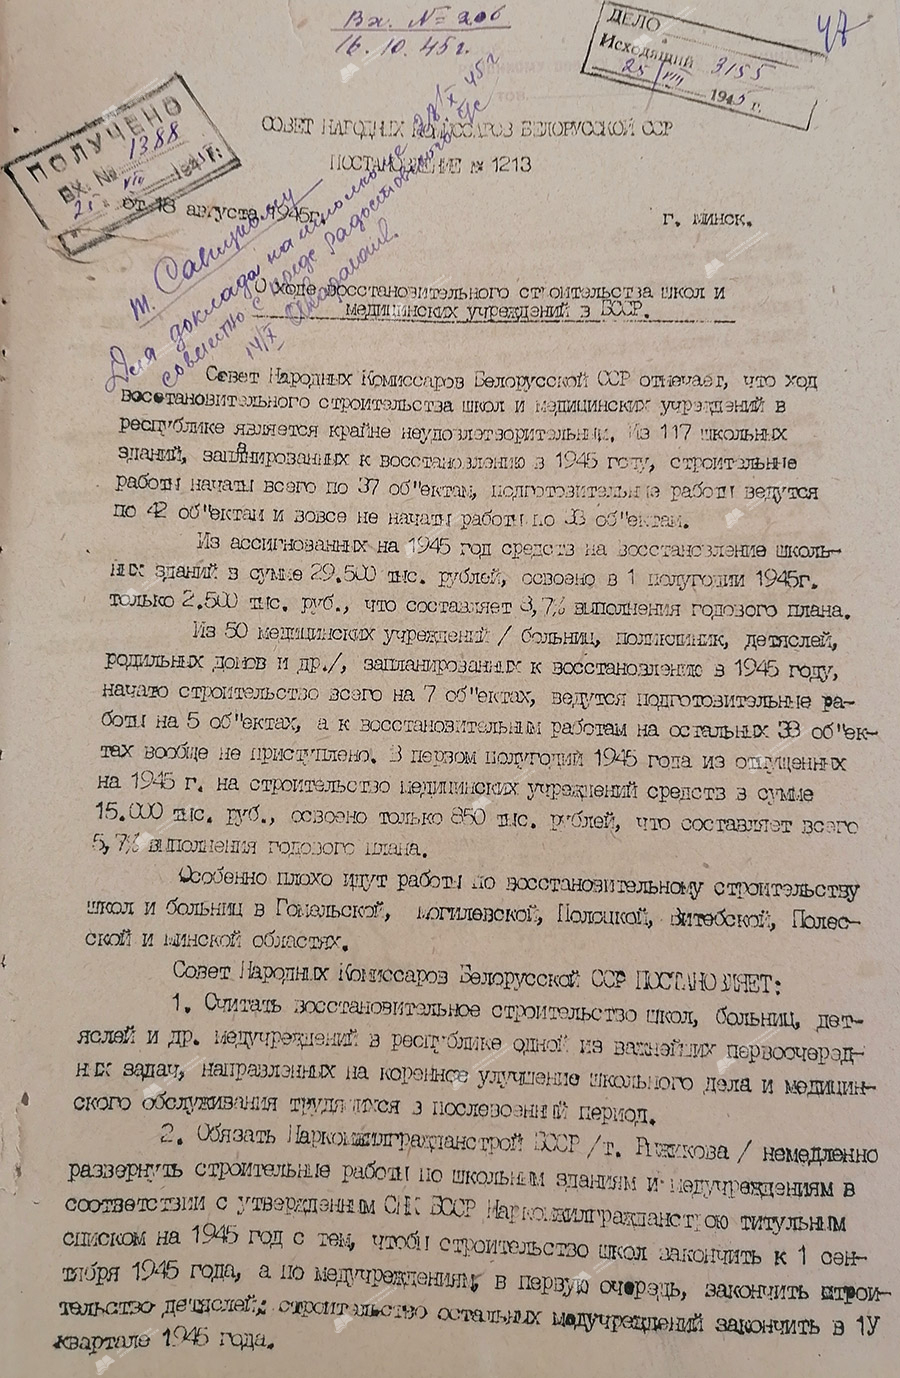 Resolution No. 1213 of the Council of People's Commissars of the BSSR «On the progress of the restoration construction of schools and medical institutions in the BSSR»-стр. 0